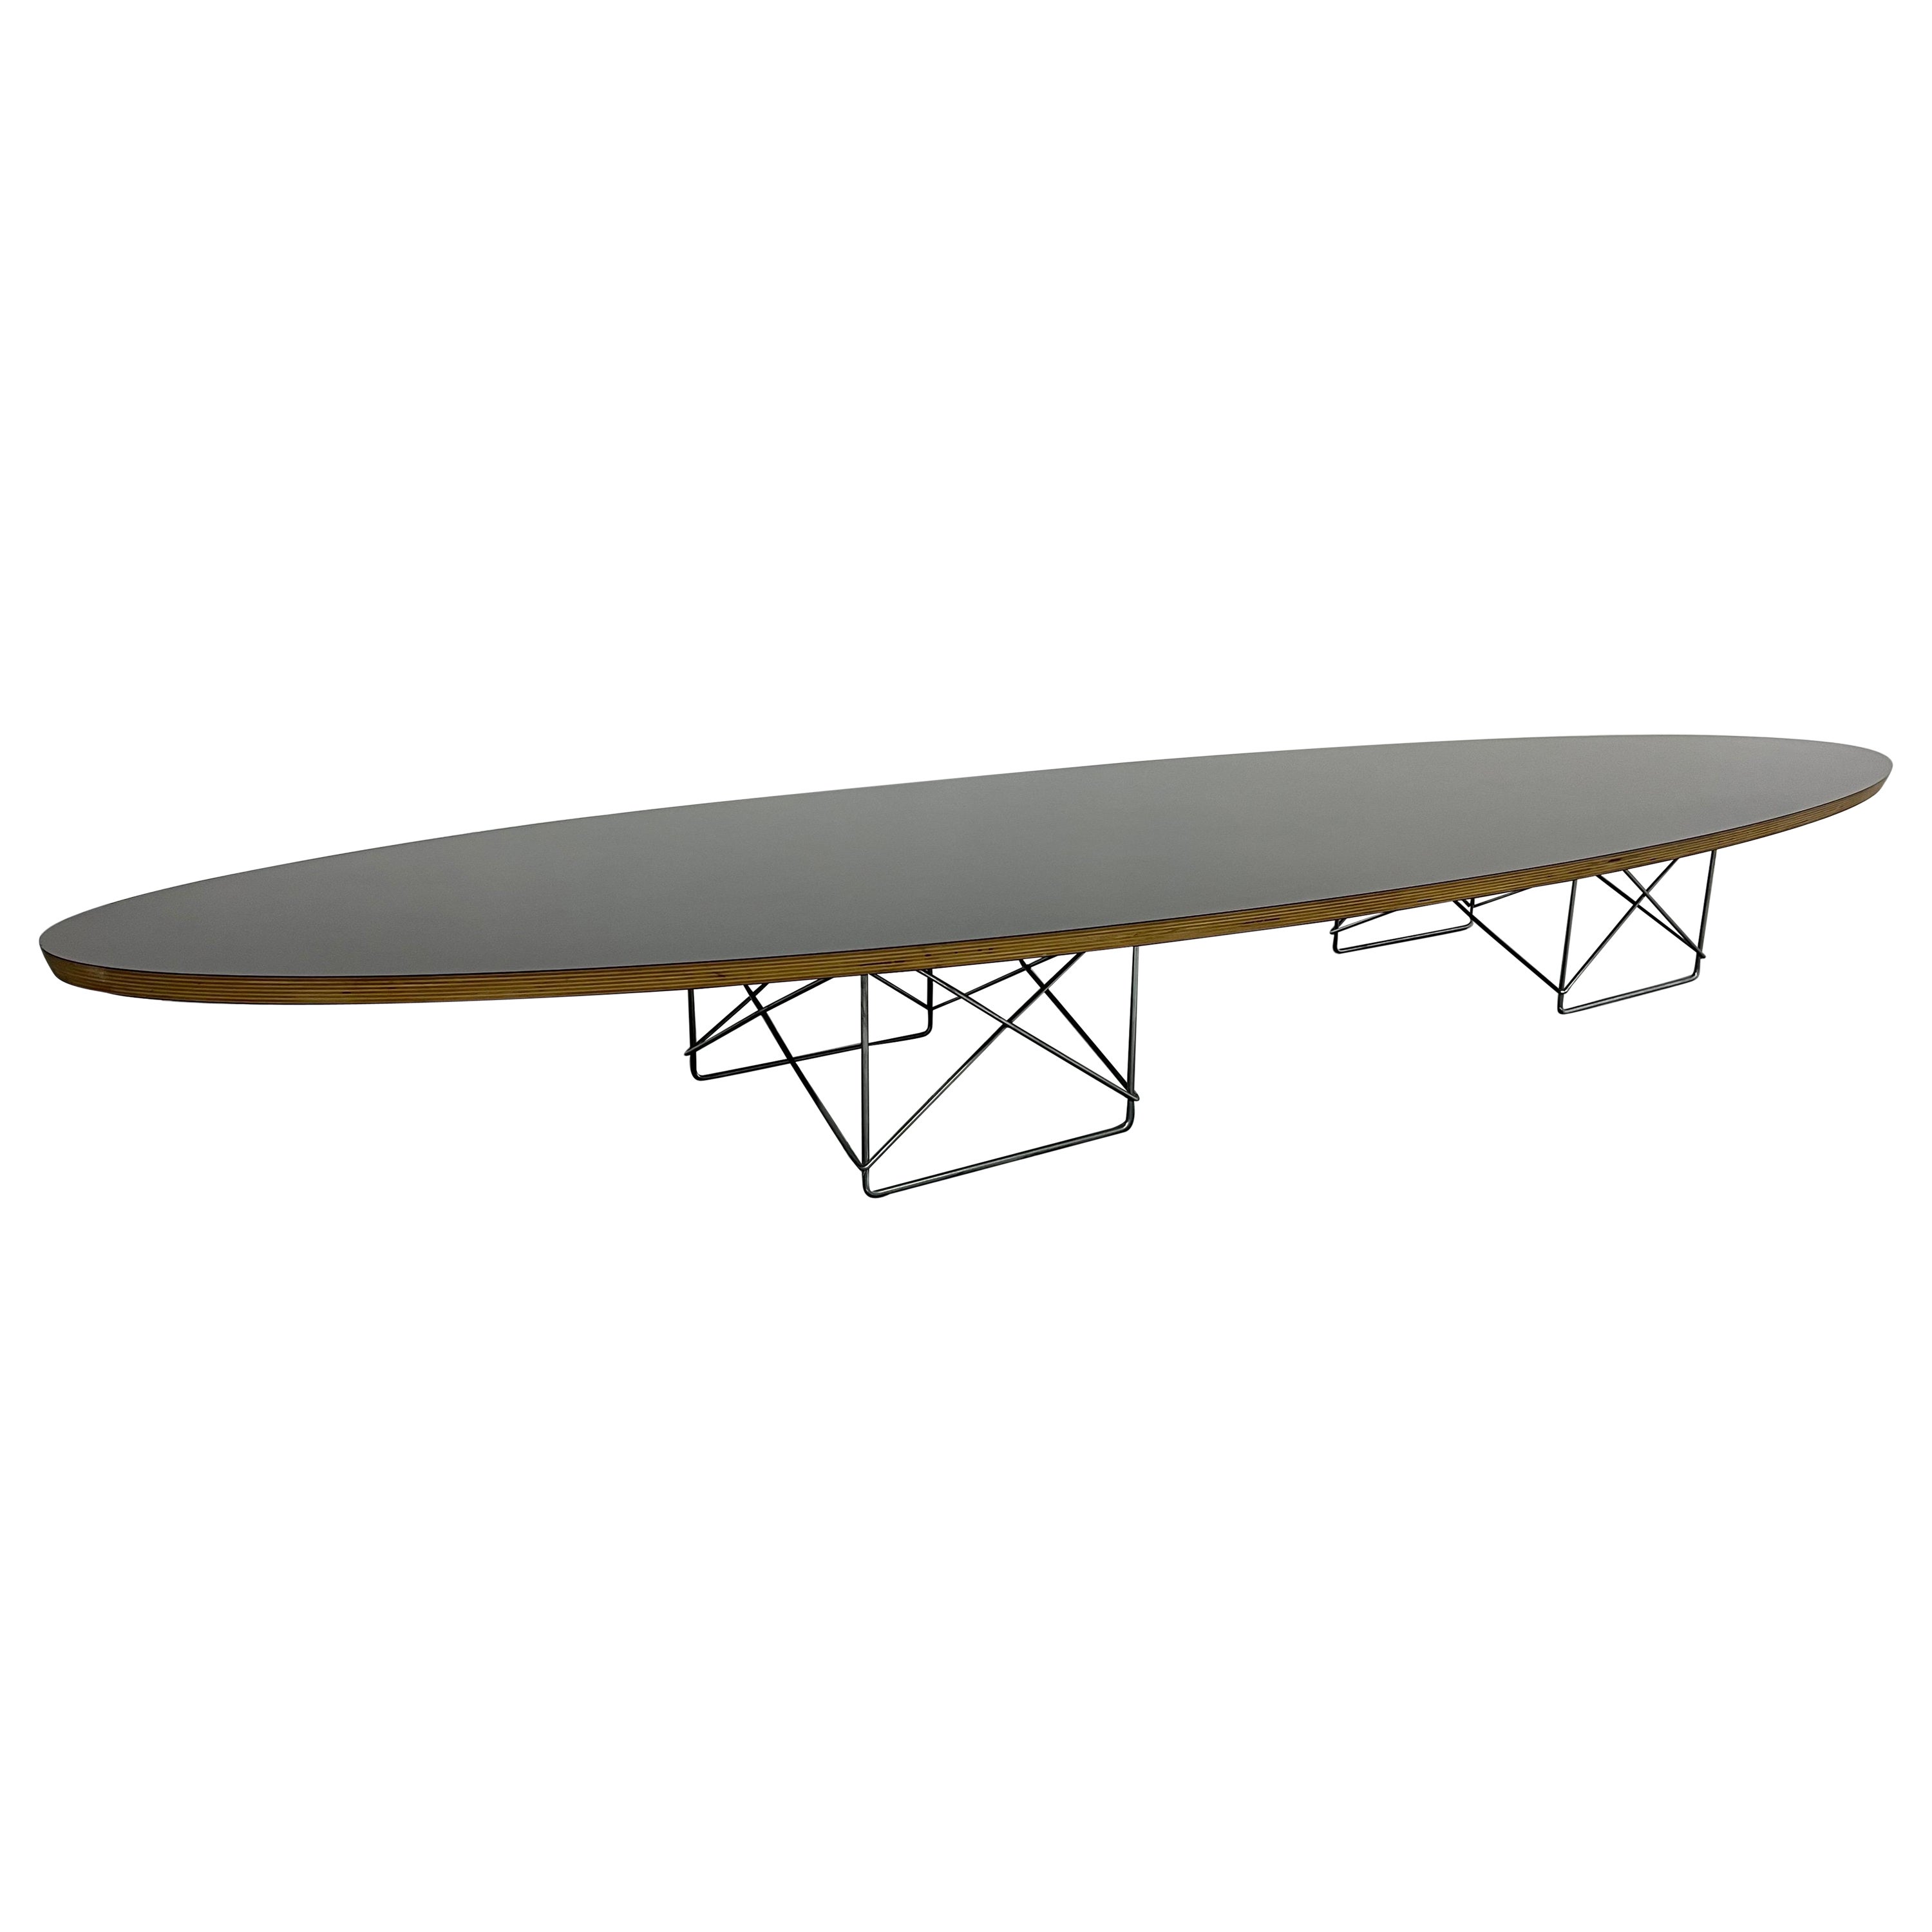 Charles and Ray Eames Elliptical Aka Surfboard Table for Herman Miller, 1990s